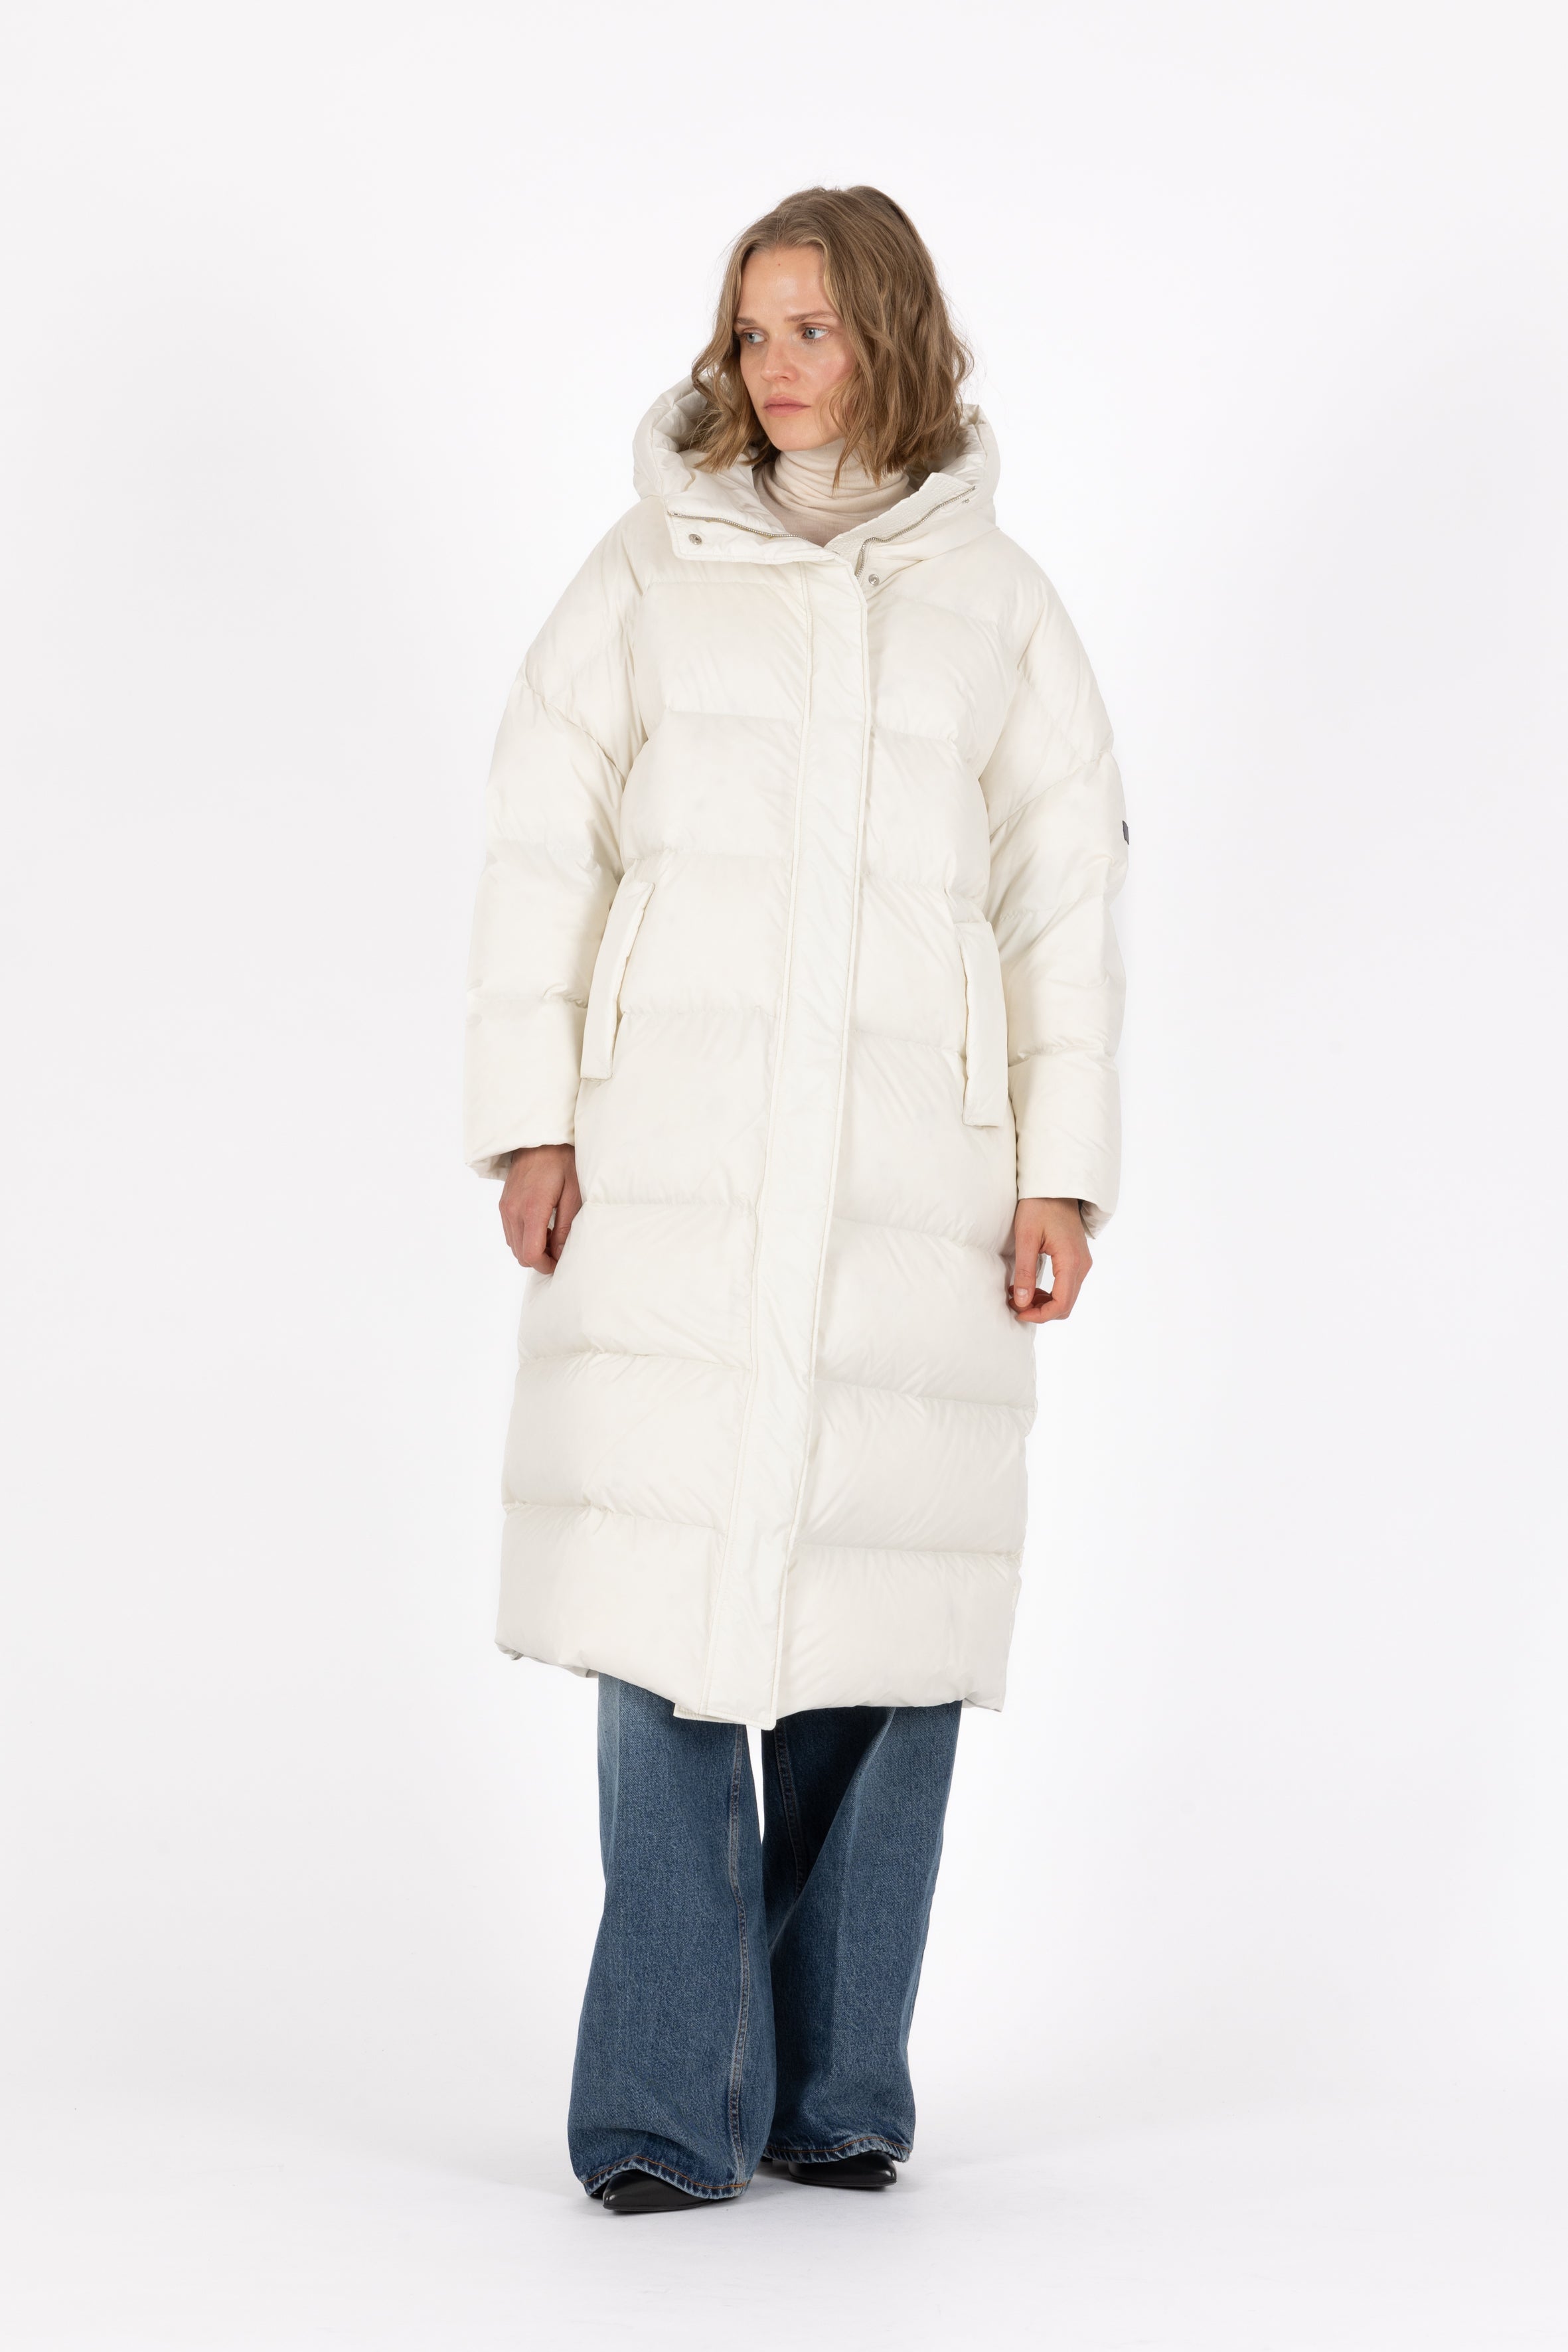 Dropped shoulders Lempelius long downcoat in off white